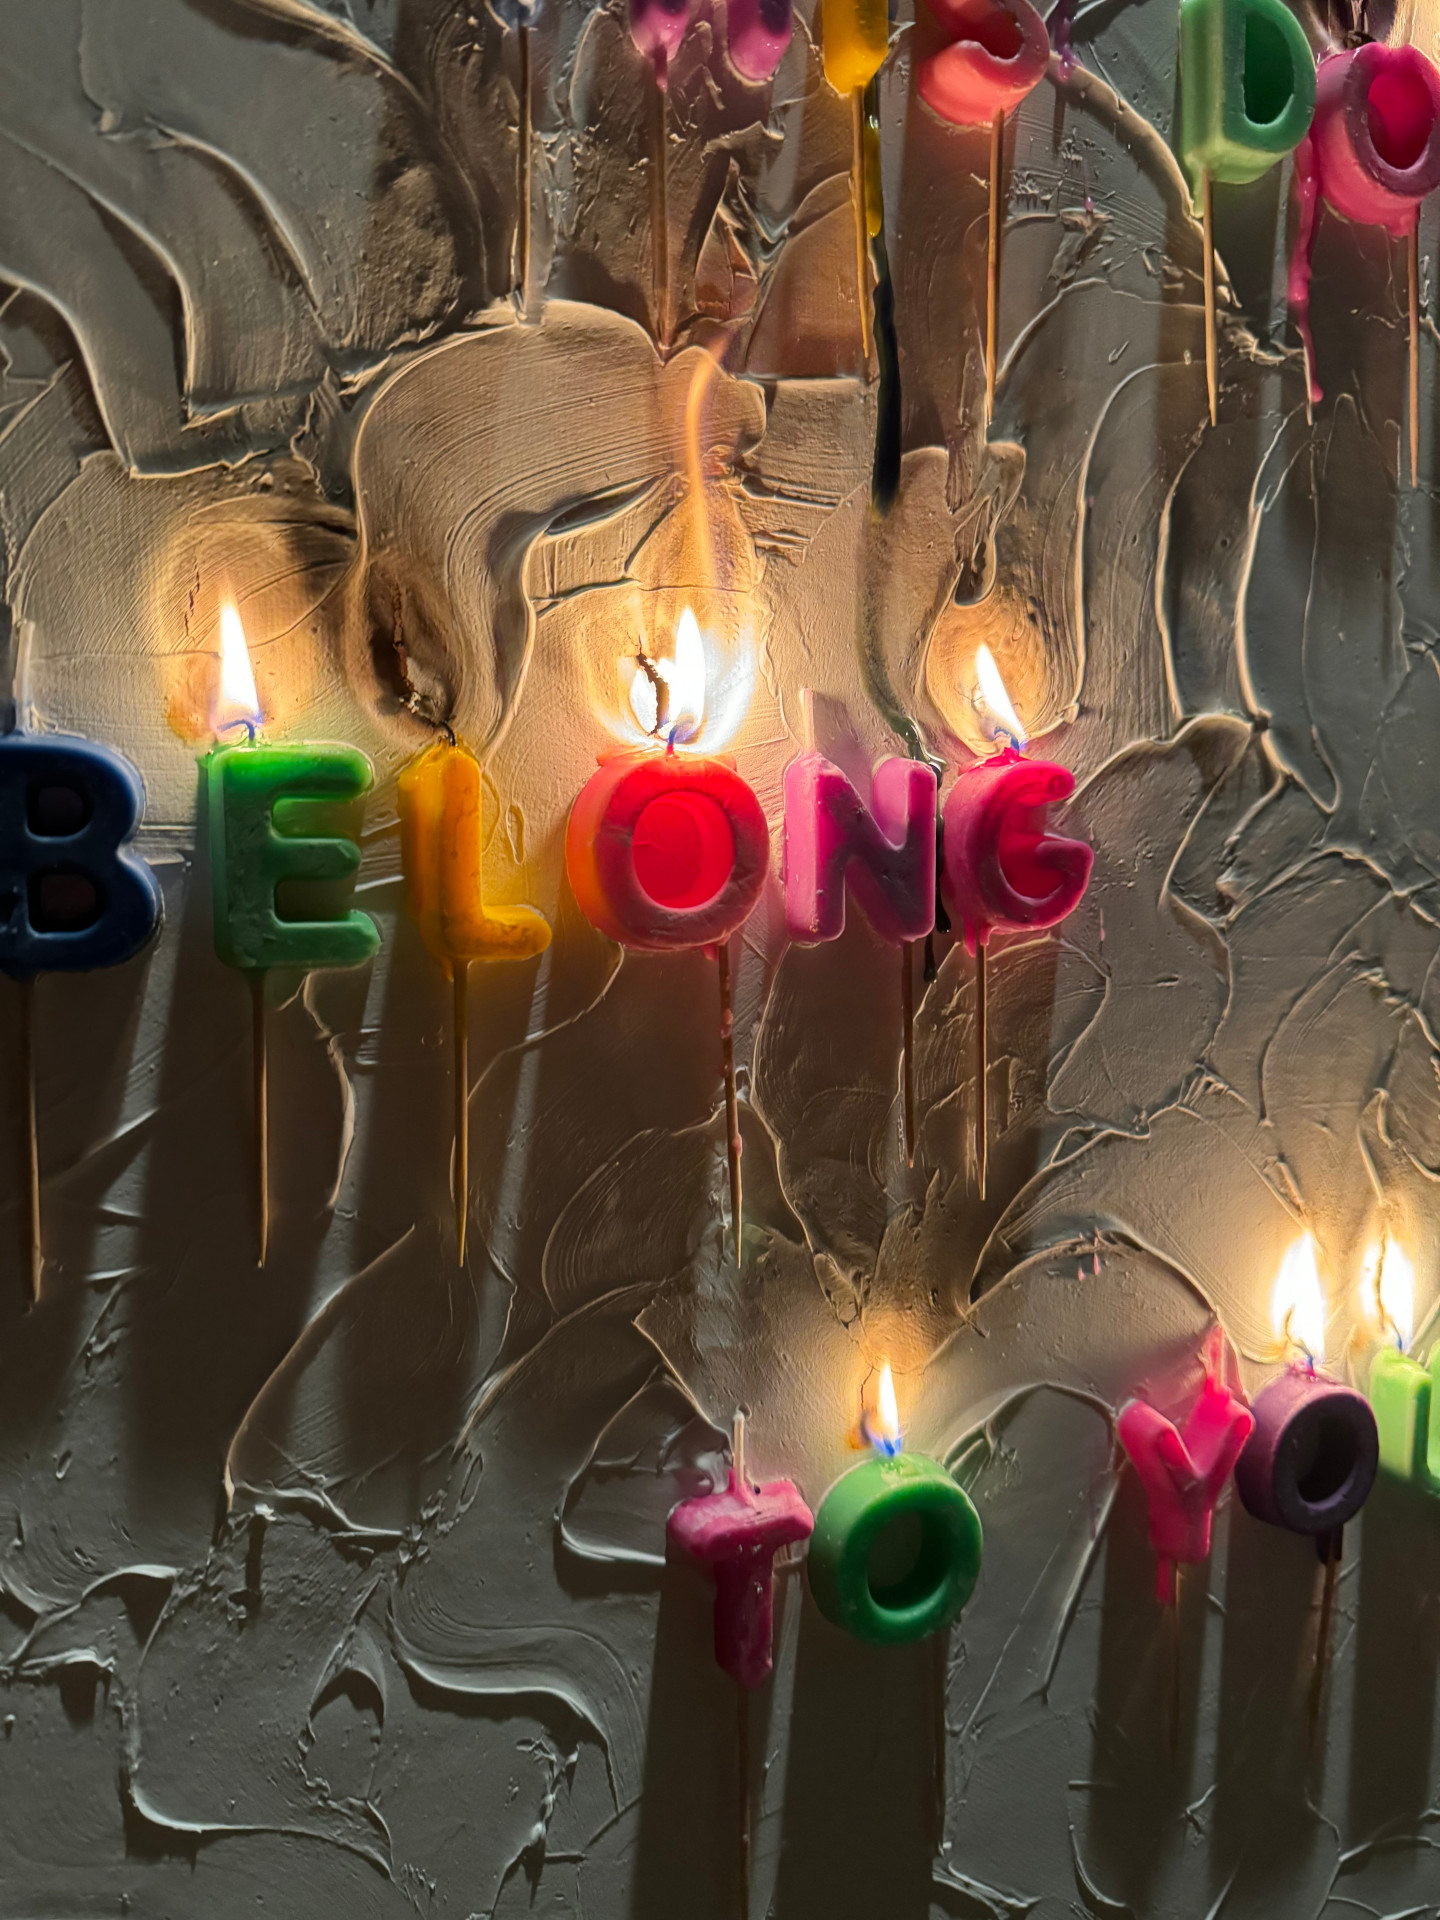 Photo of fridge magnets message on canvas with candles burning above